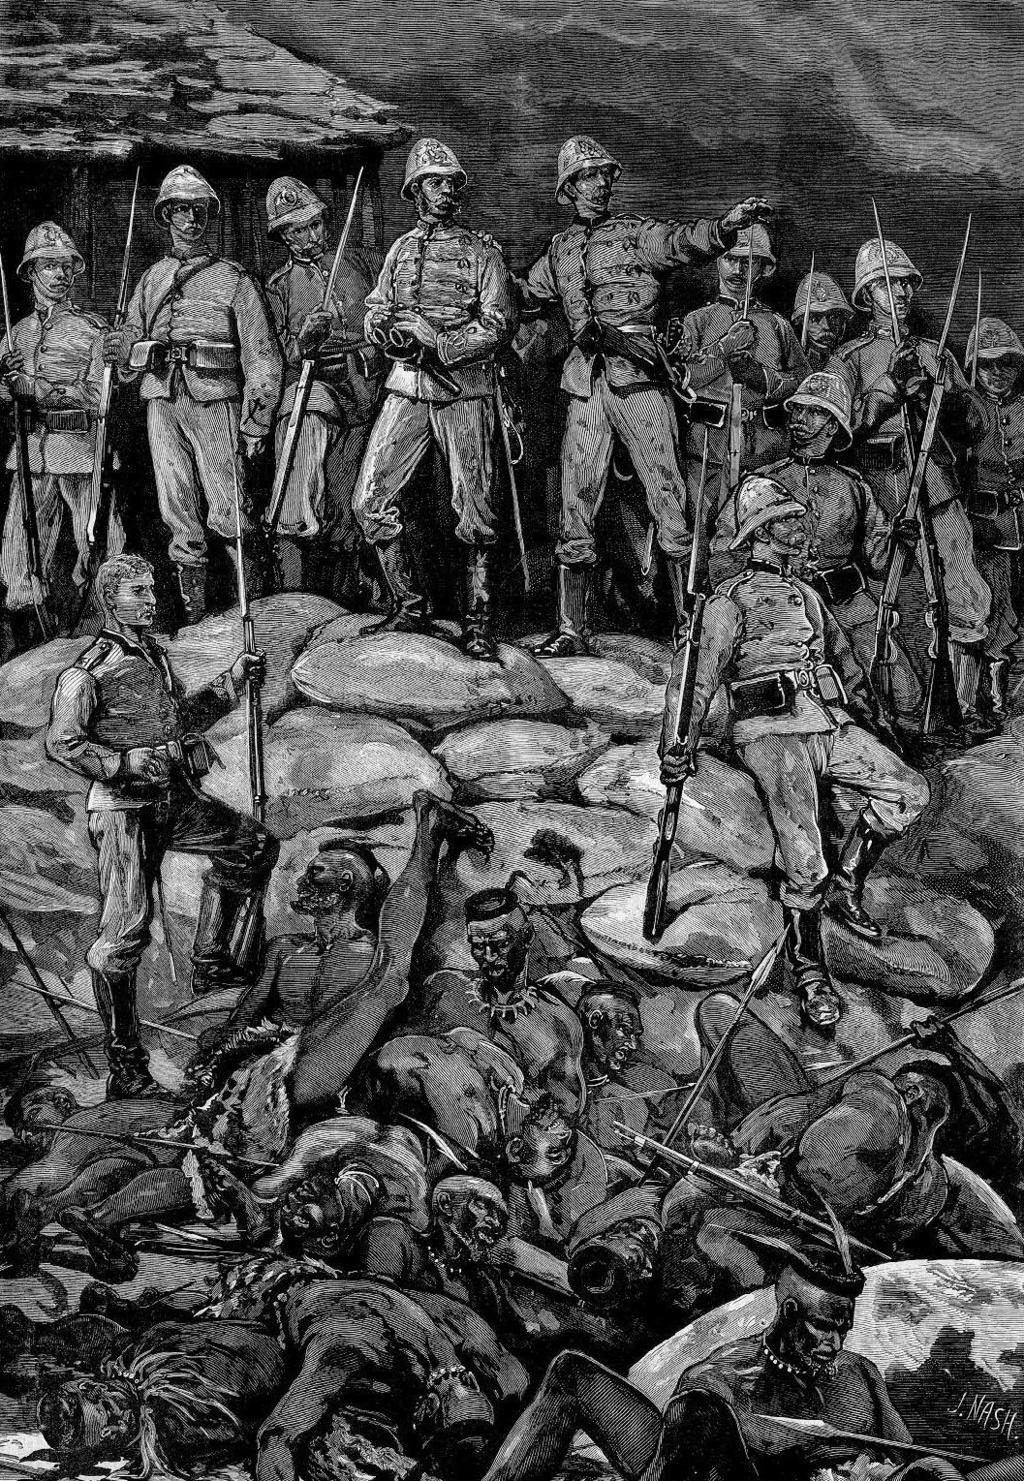 BRITISH VICTORY AT RORKE S DRIFT A series of desperate assaults were made, on the hospital, and extending from the hospital, as far as the bush reached; but each was most splendidly met and repulsed